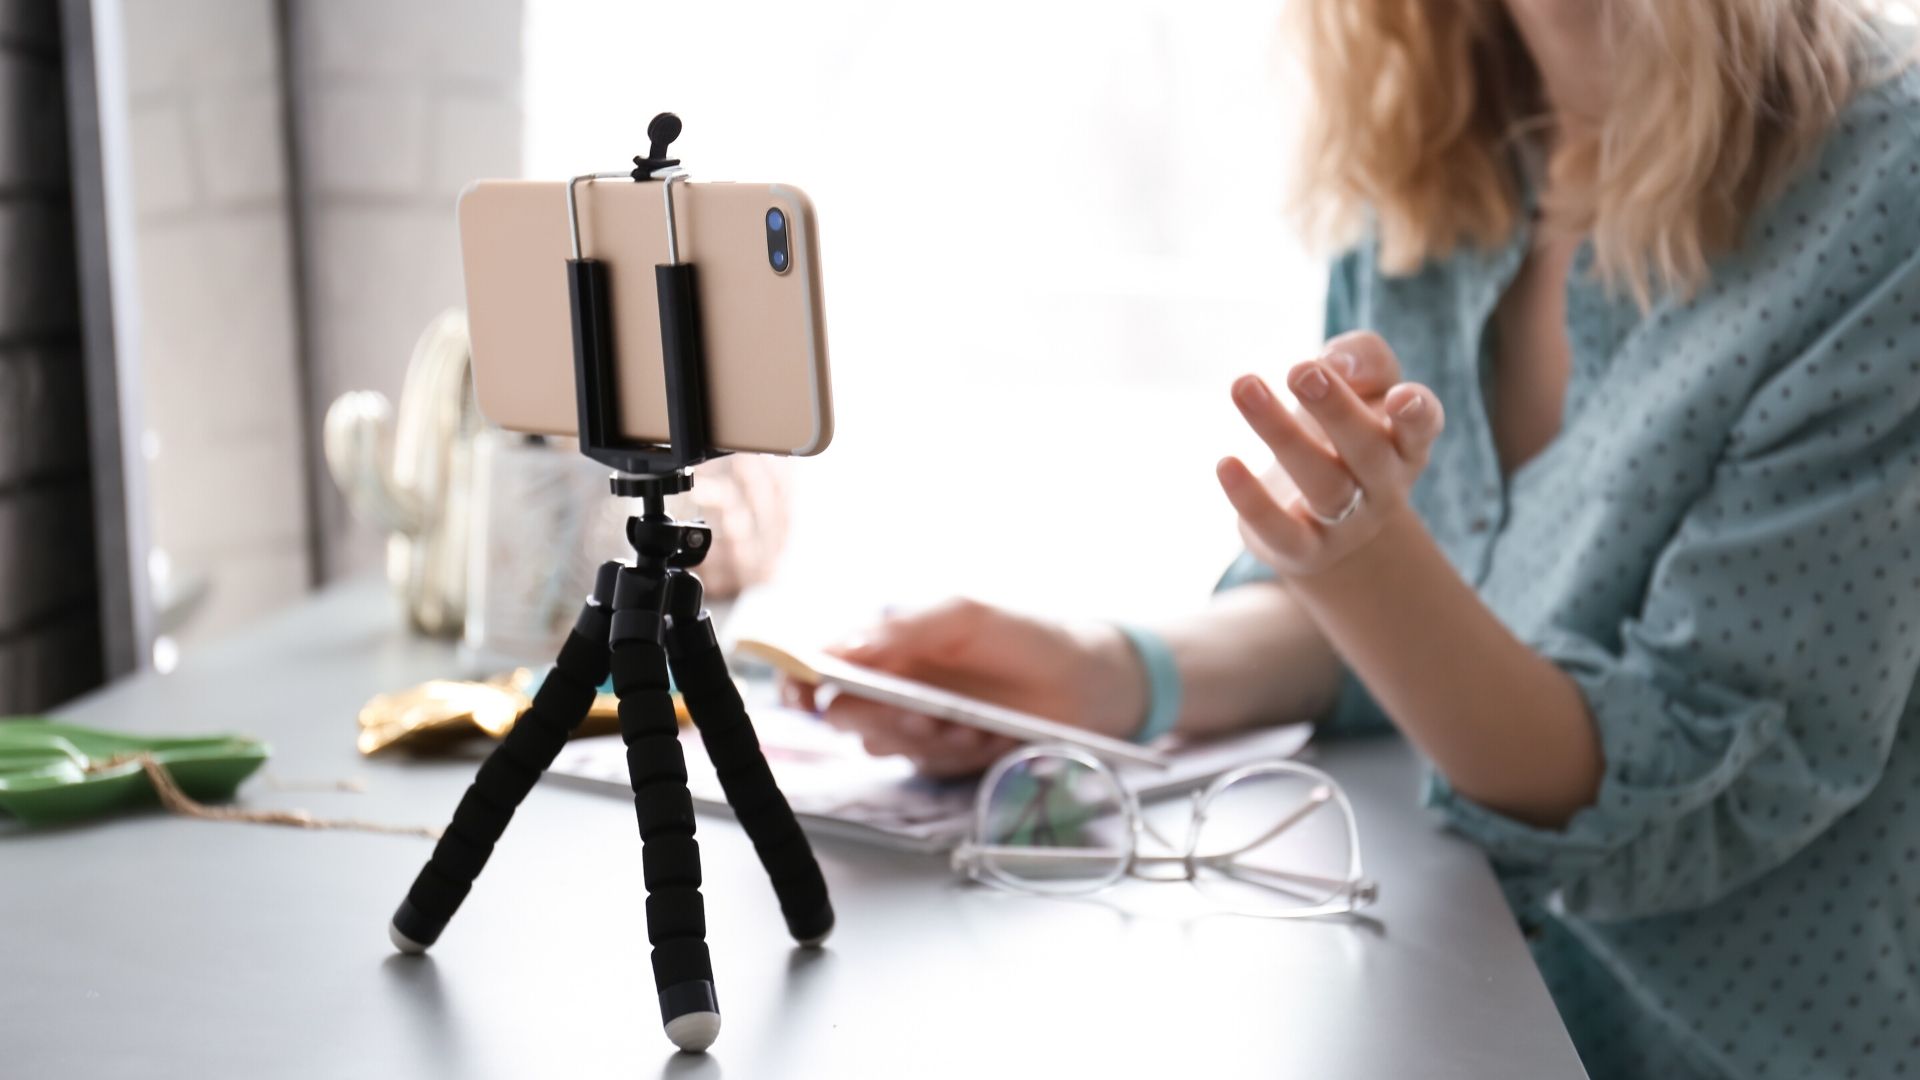 How to Record Videos While Working Remotely